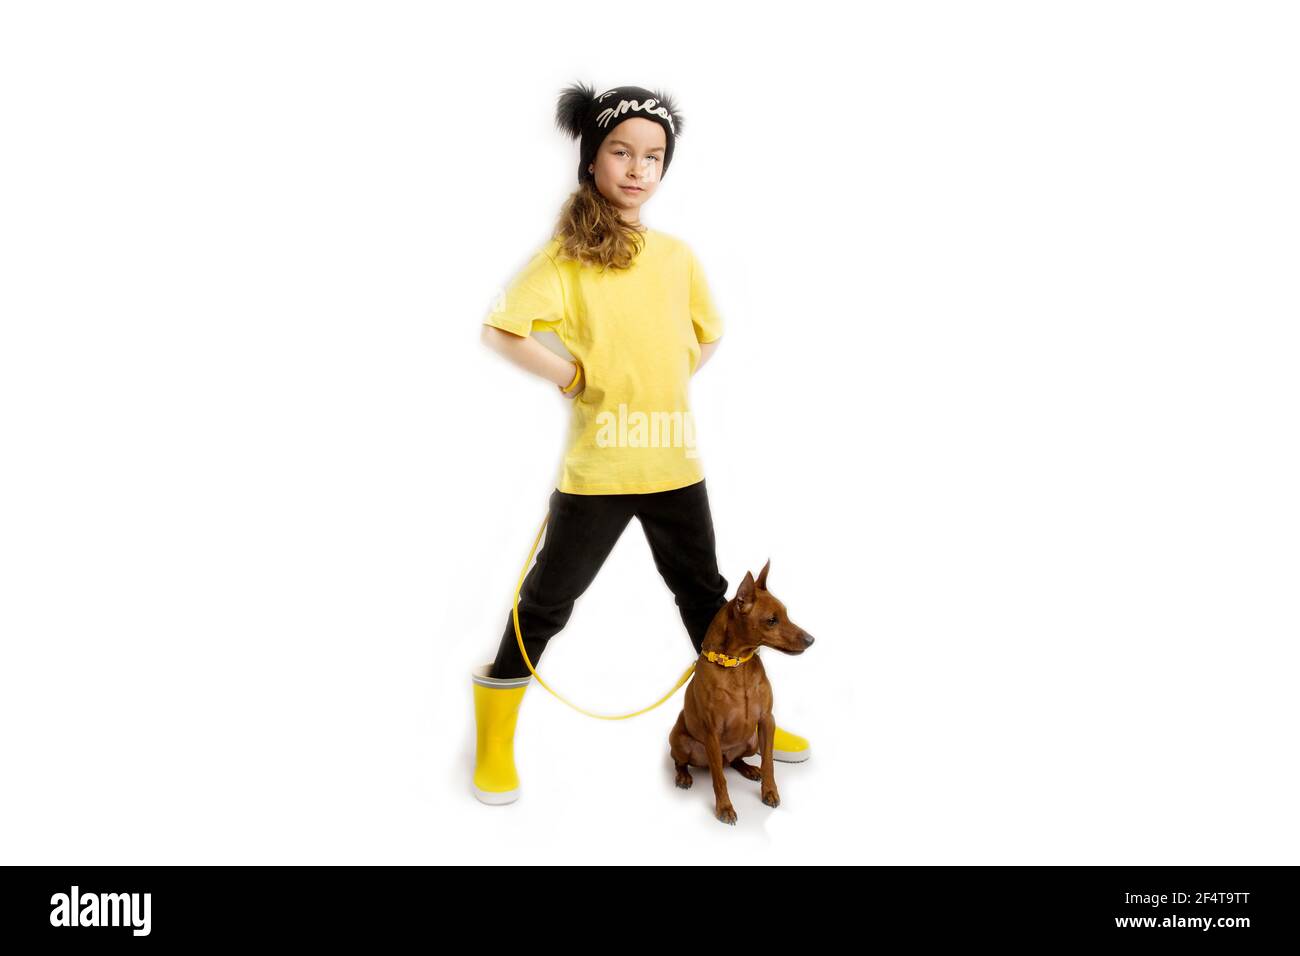 Little girl with dog, black and yellow clothes. White background. Studio shooting. Baby pets concept. Happy childhood Stock Photo